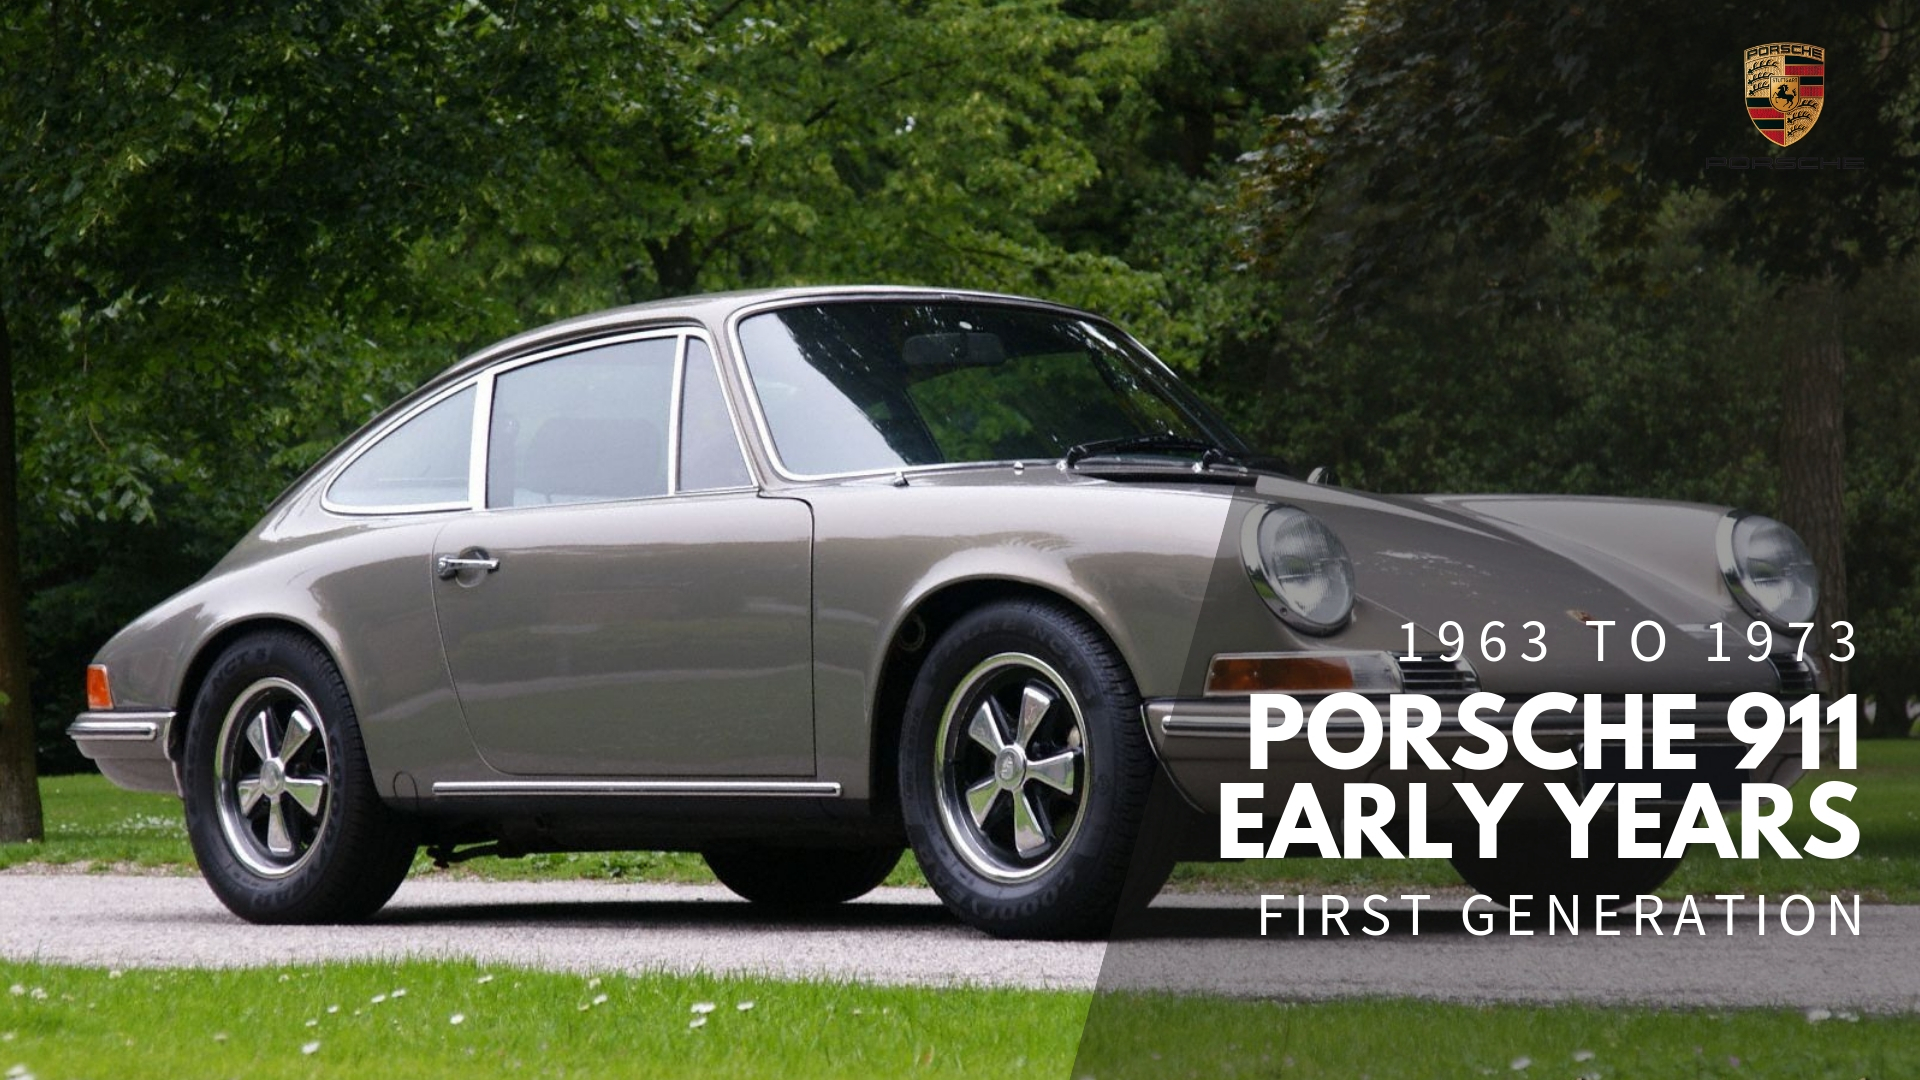 Guide to the Porsche 911 Generations: Every Generation Explained